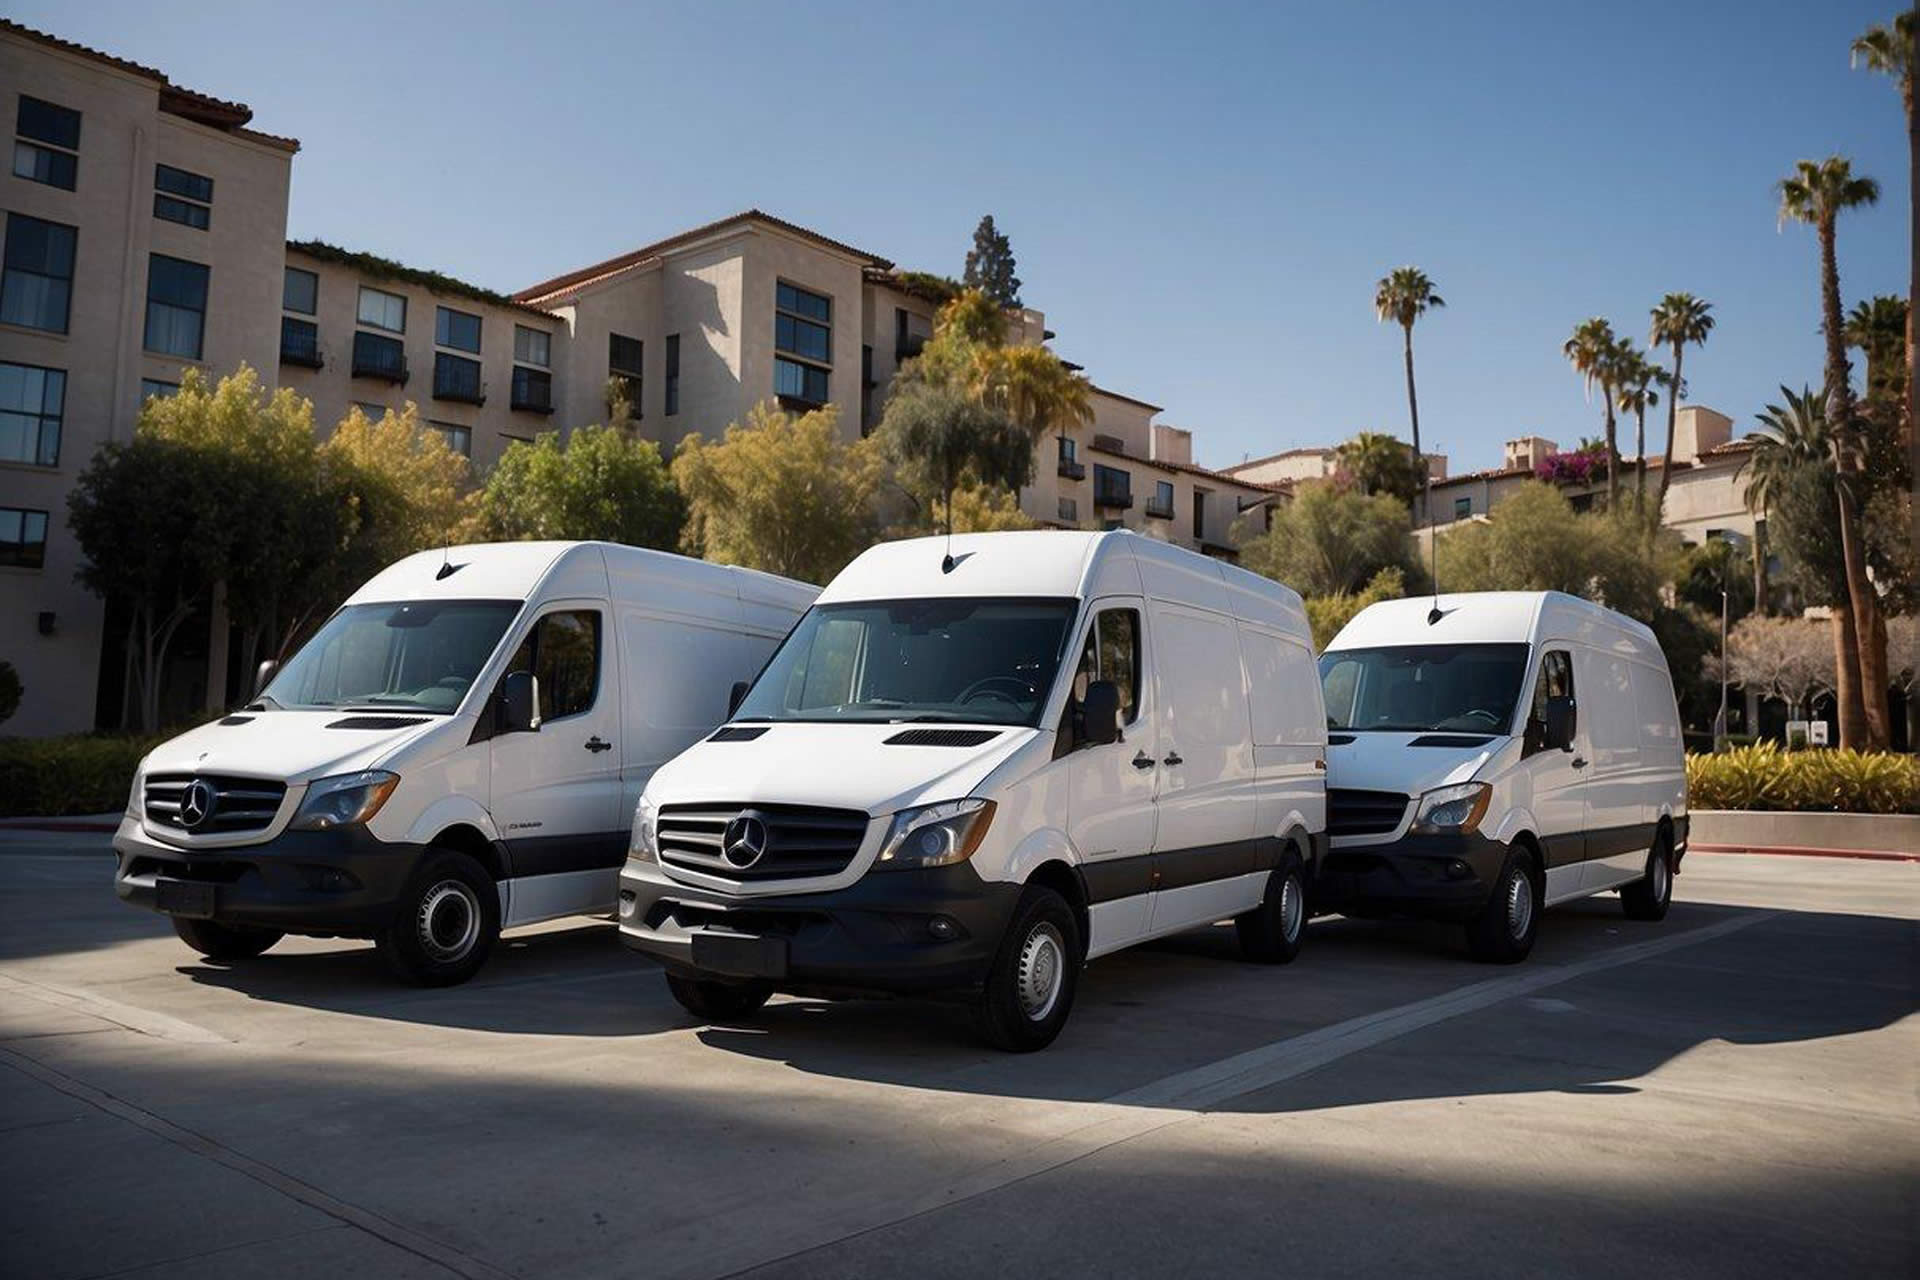 Three Mercedes Sprinter vans parked in front of a luxury hotel in Los Angeles, with the company logos displayed prominently on the vehicles